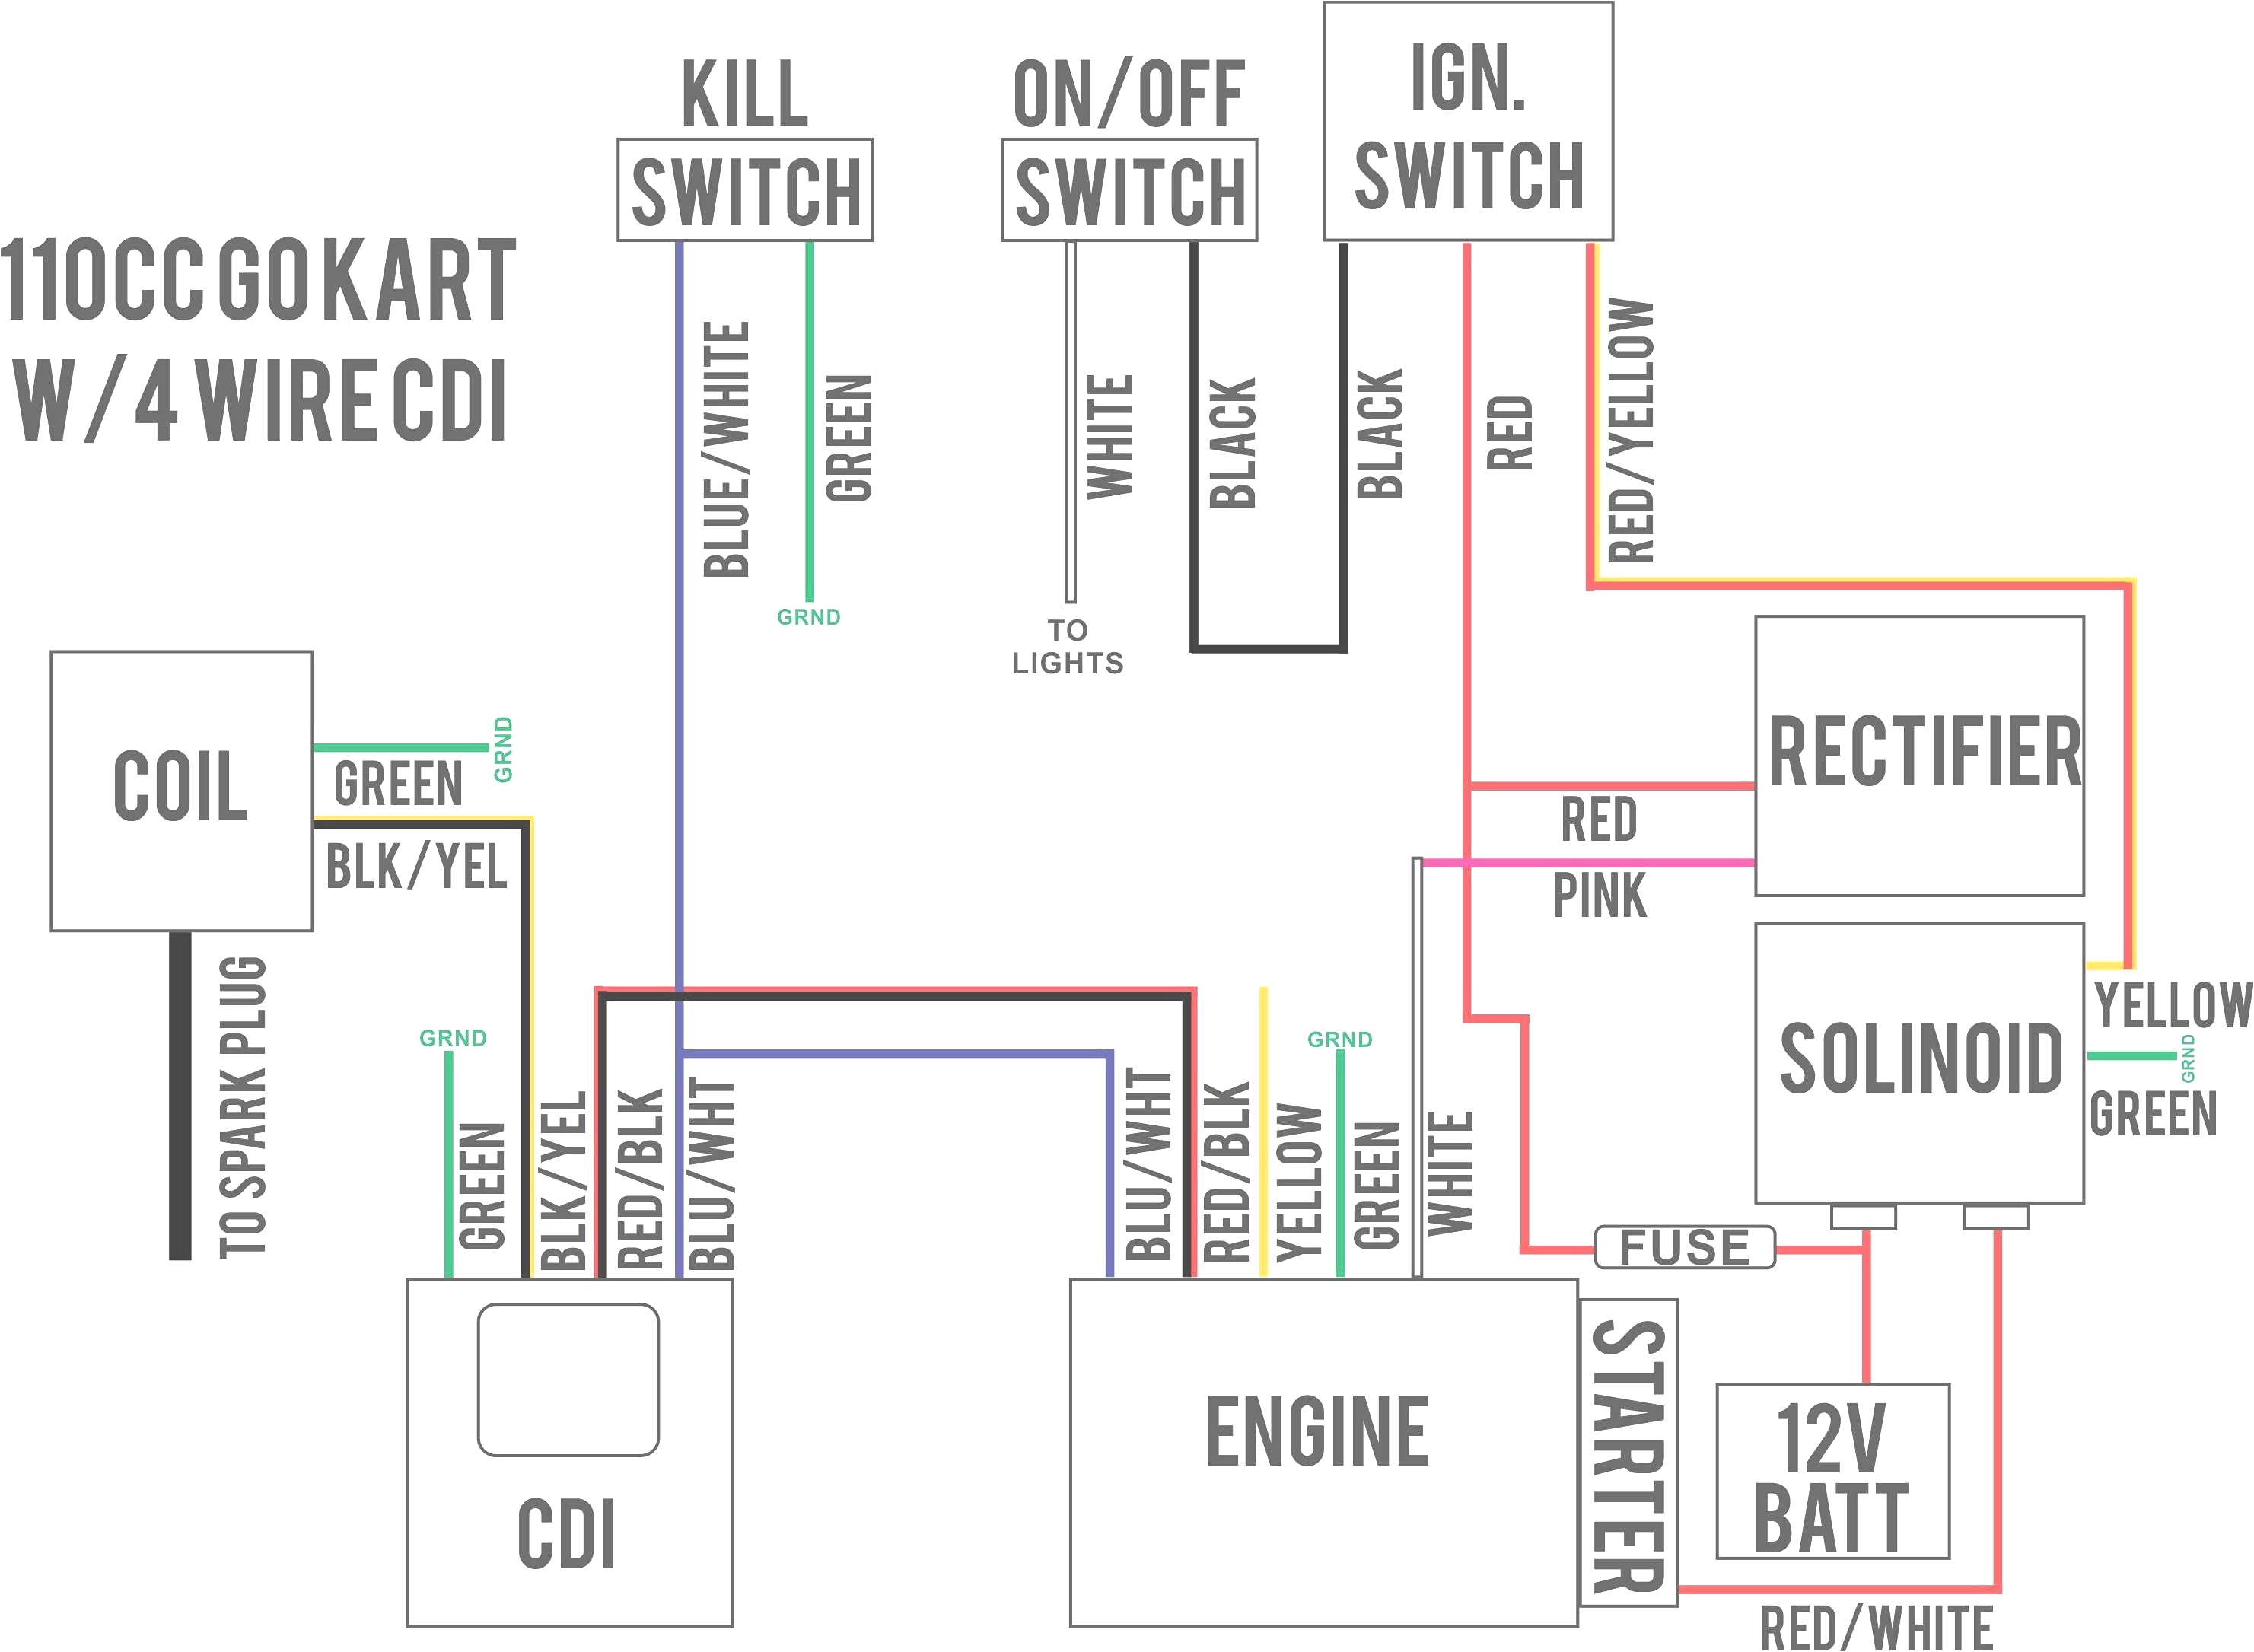 wiring diagram vs commodore stereo wiring diagram go vs calais stereo wiring diagram